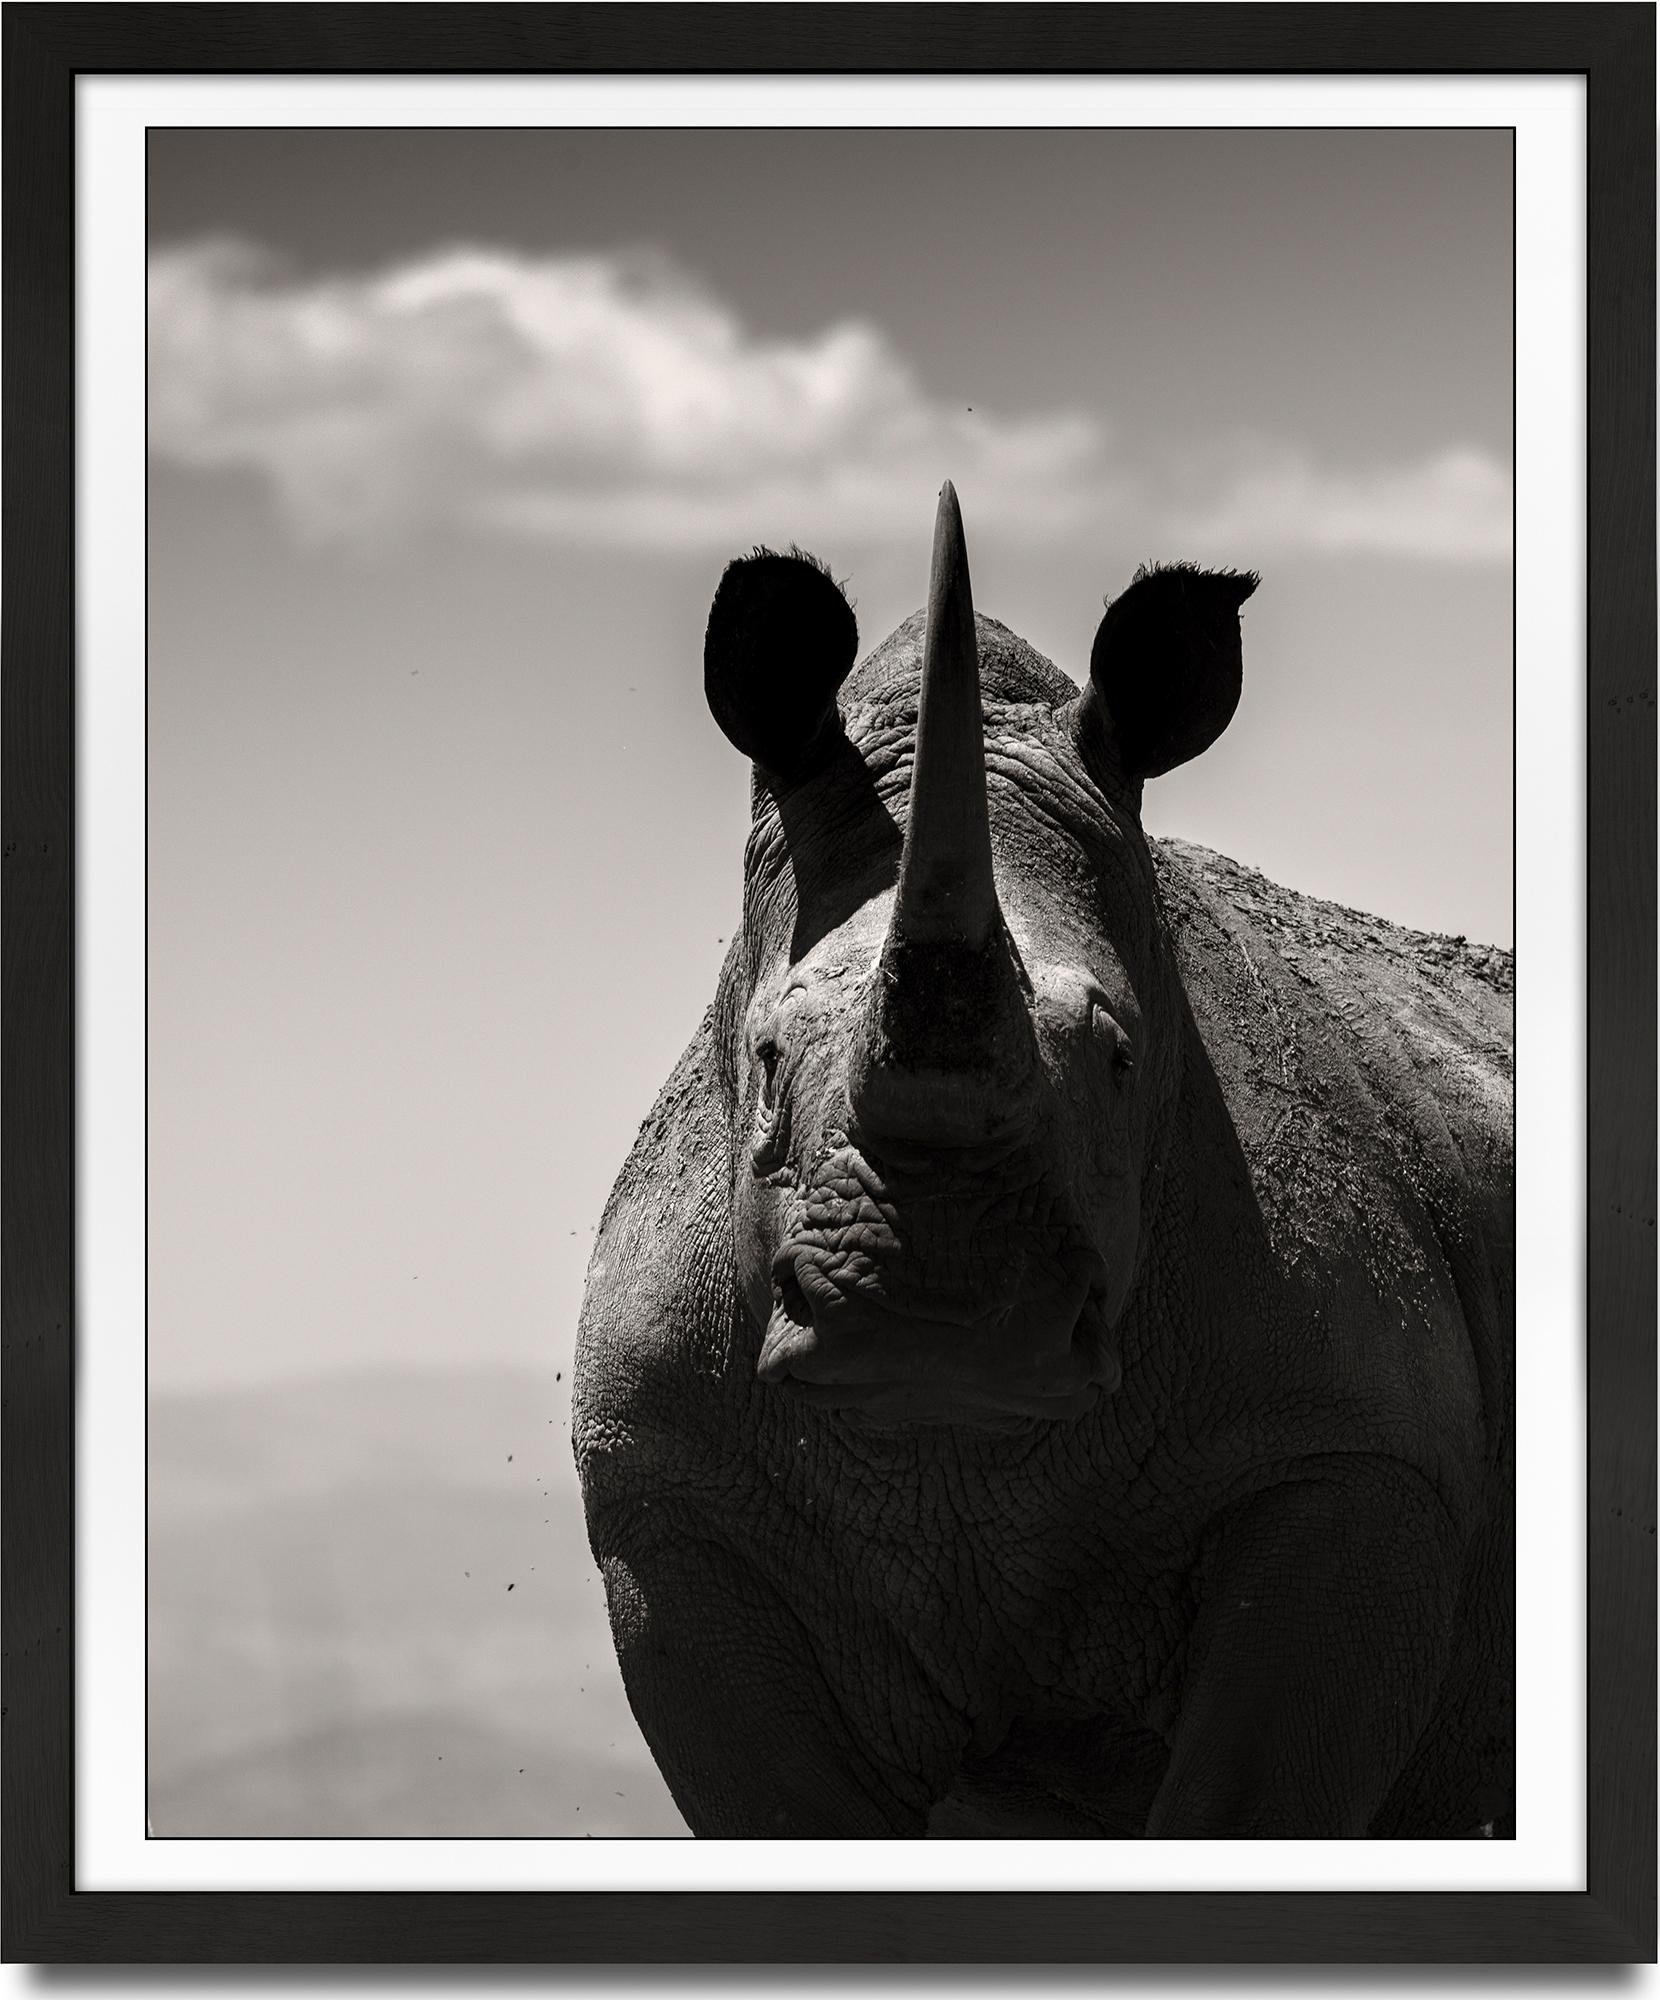 Noble Soul, africa, Rhino, animal, wildlife, black and white photography - Photograph by Joachim Schmeisser